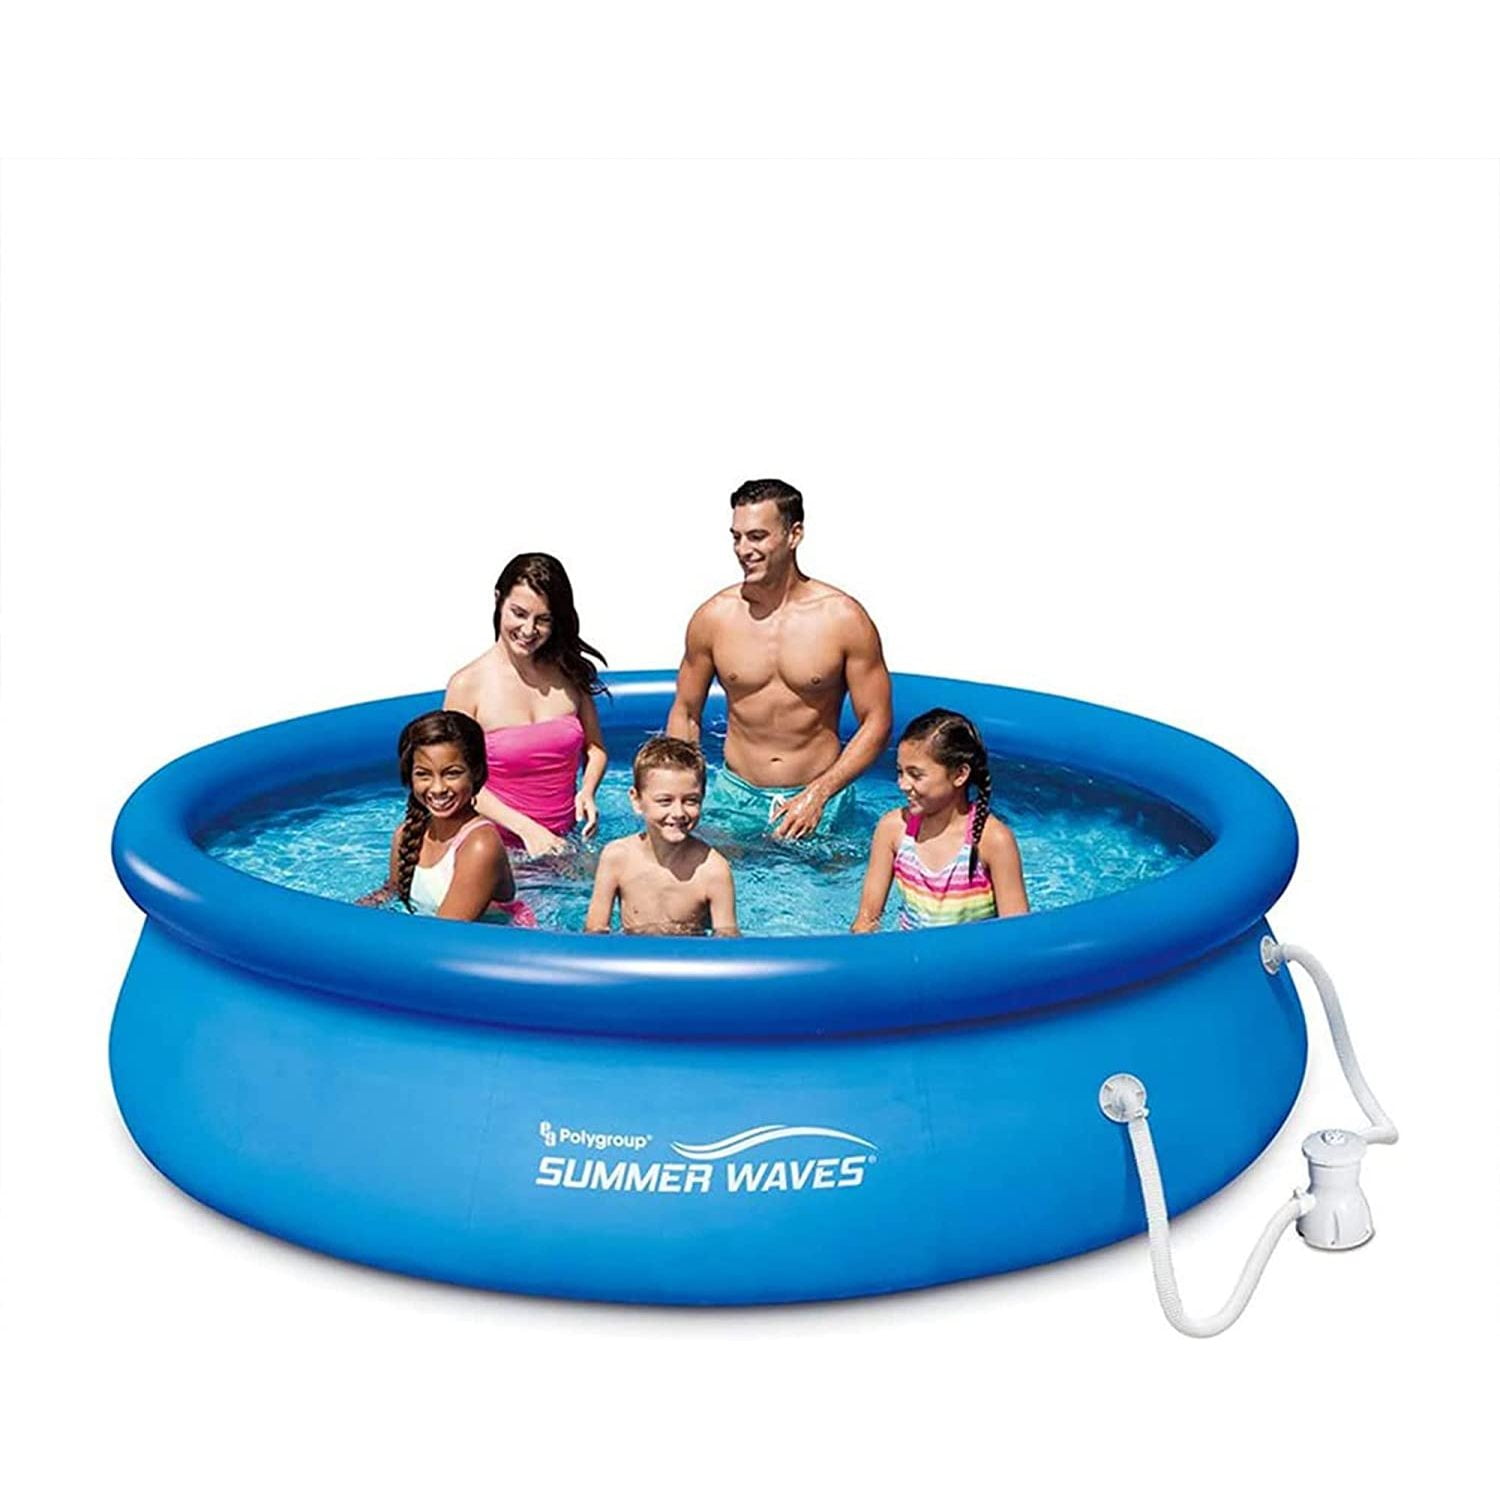 Above Blue Inflatable Ring x RX300 2.5ft Waves Summer P1001030A Ground Filter Outdoor GFCI Swimming with 10ft System, Set Pool Outdoor Pump Quick